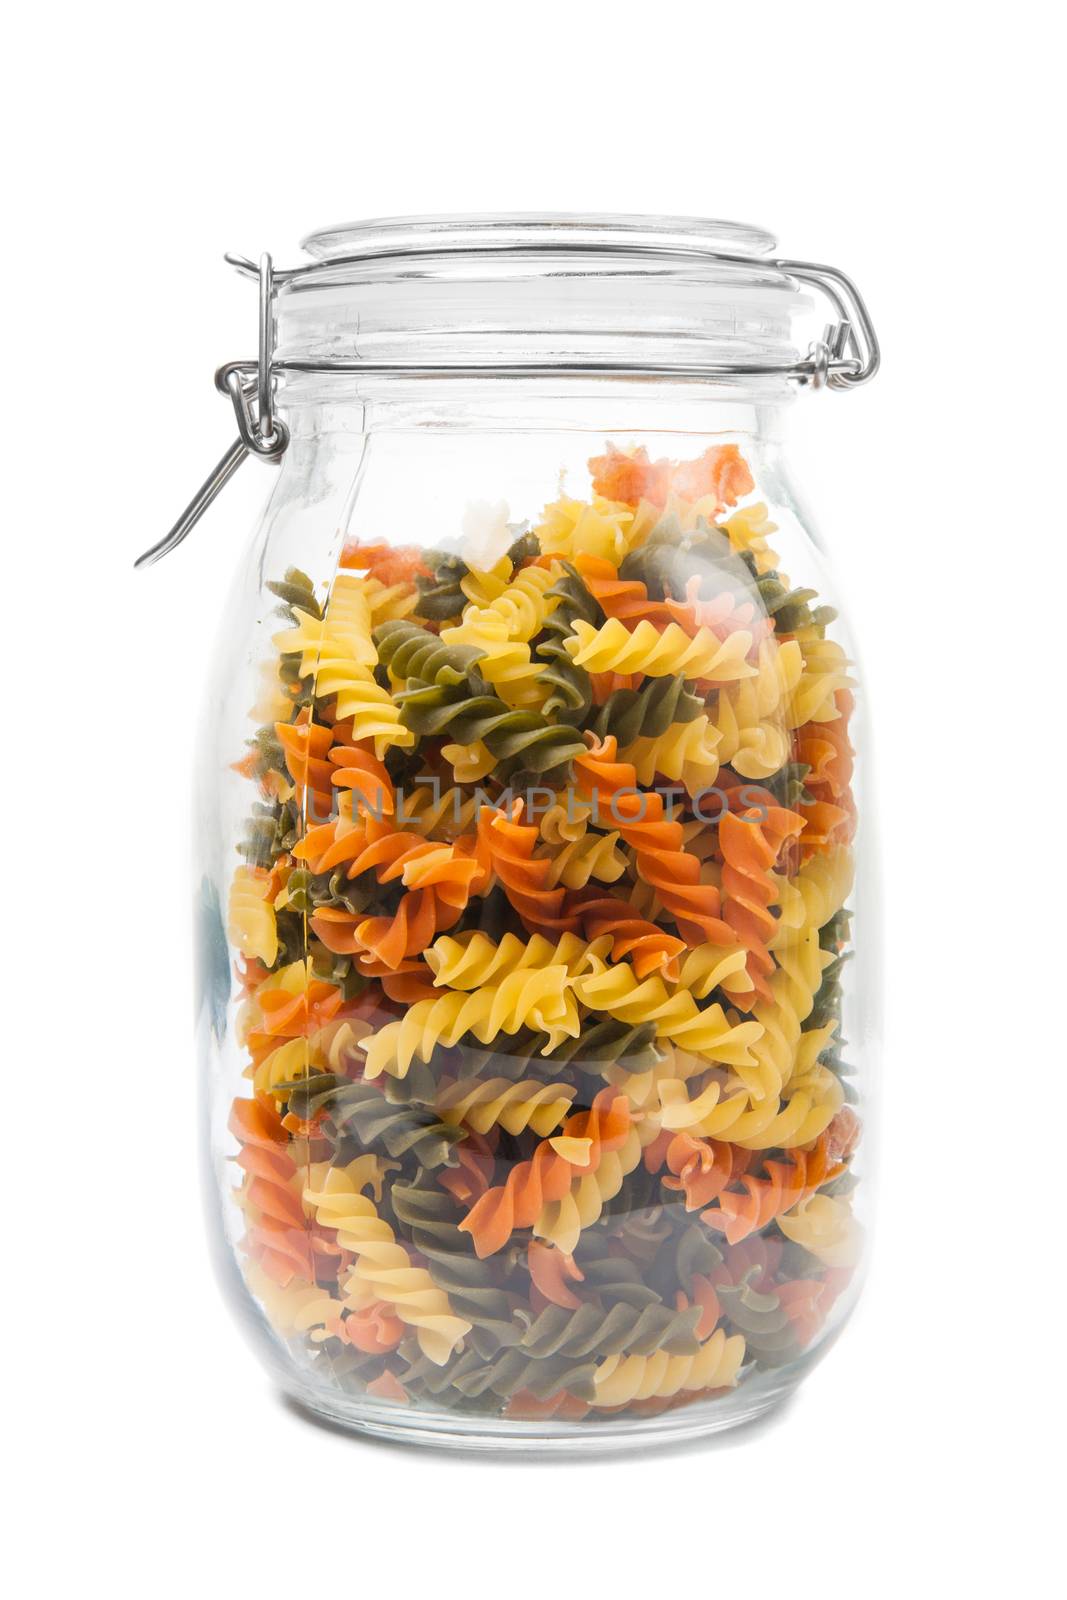 Pasta in a jar. Isolated on white background.